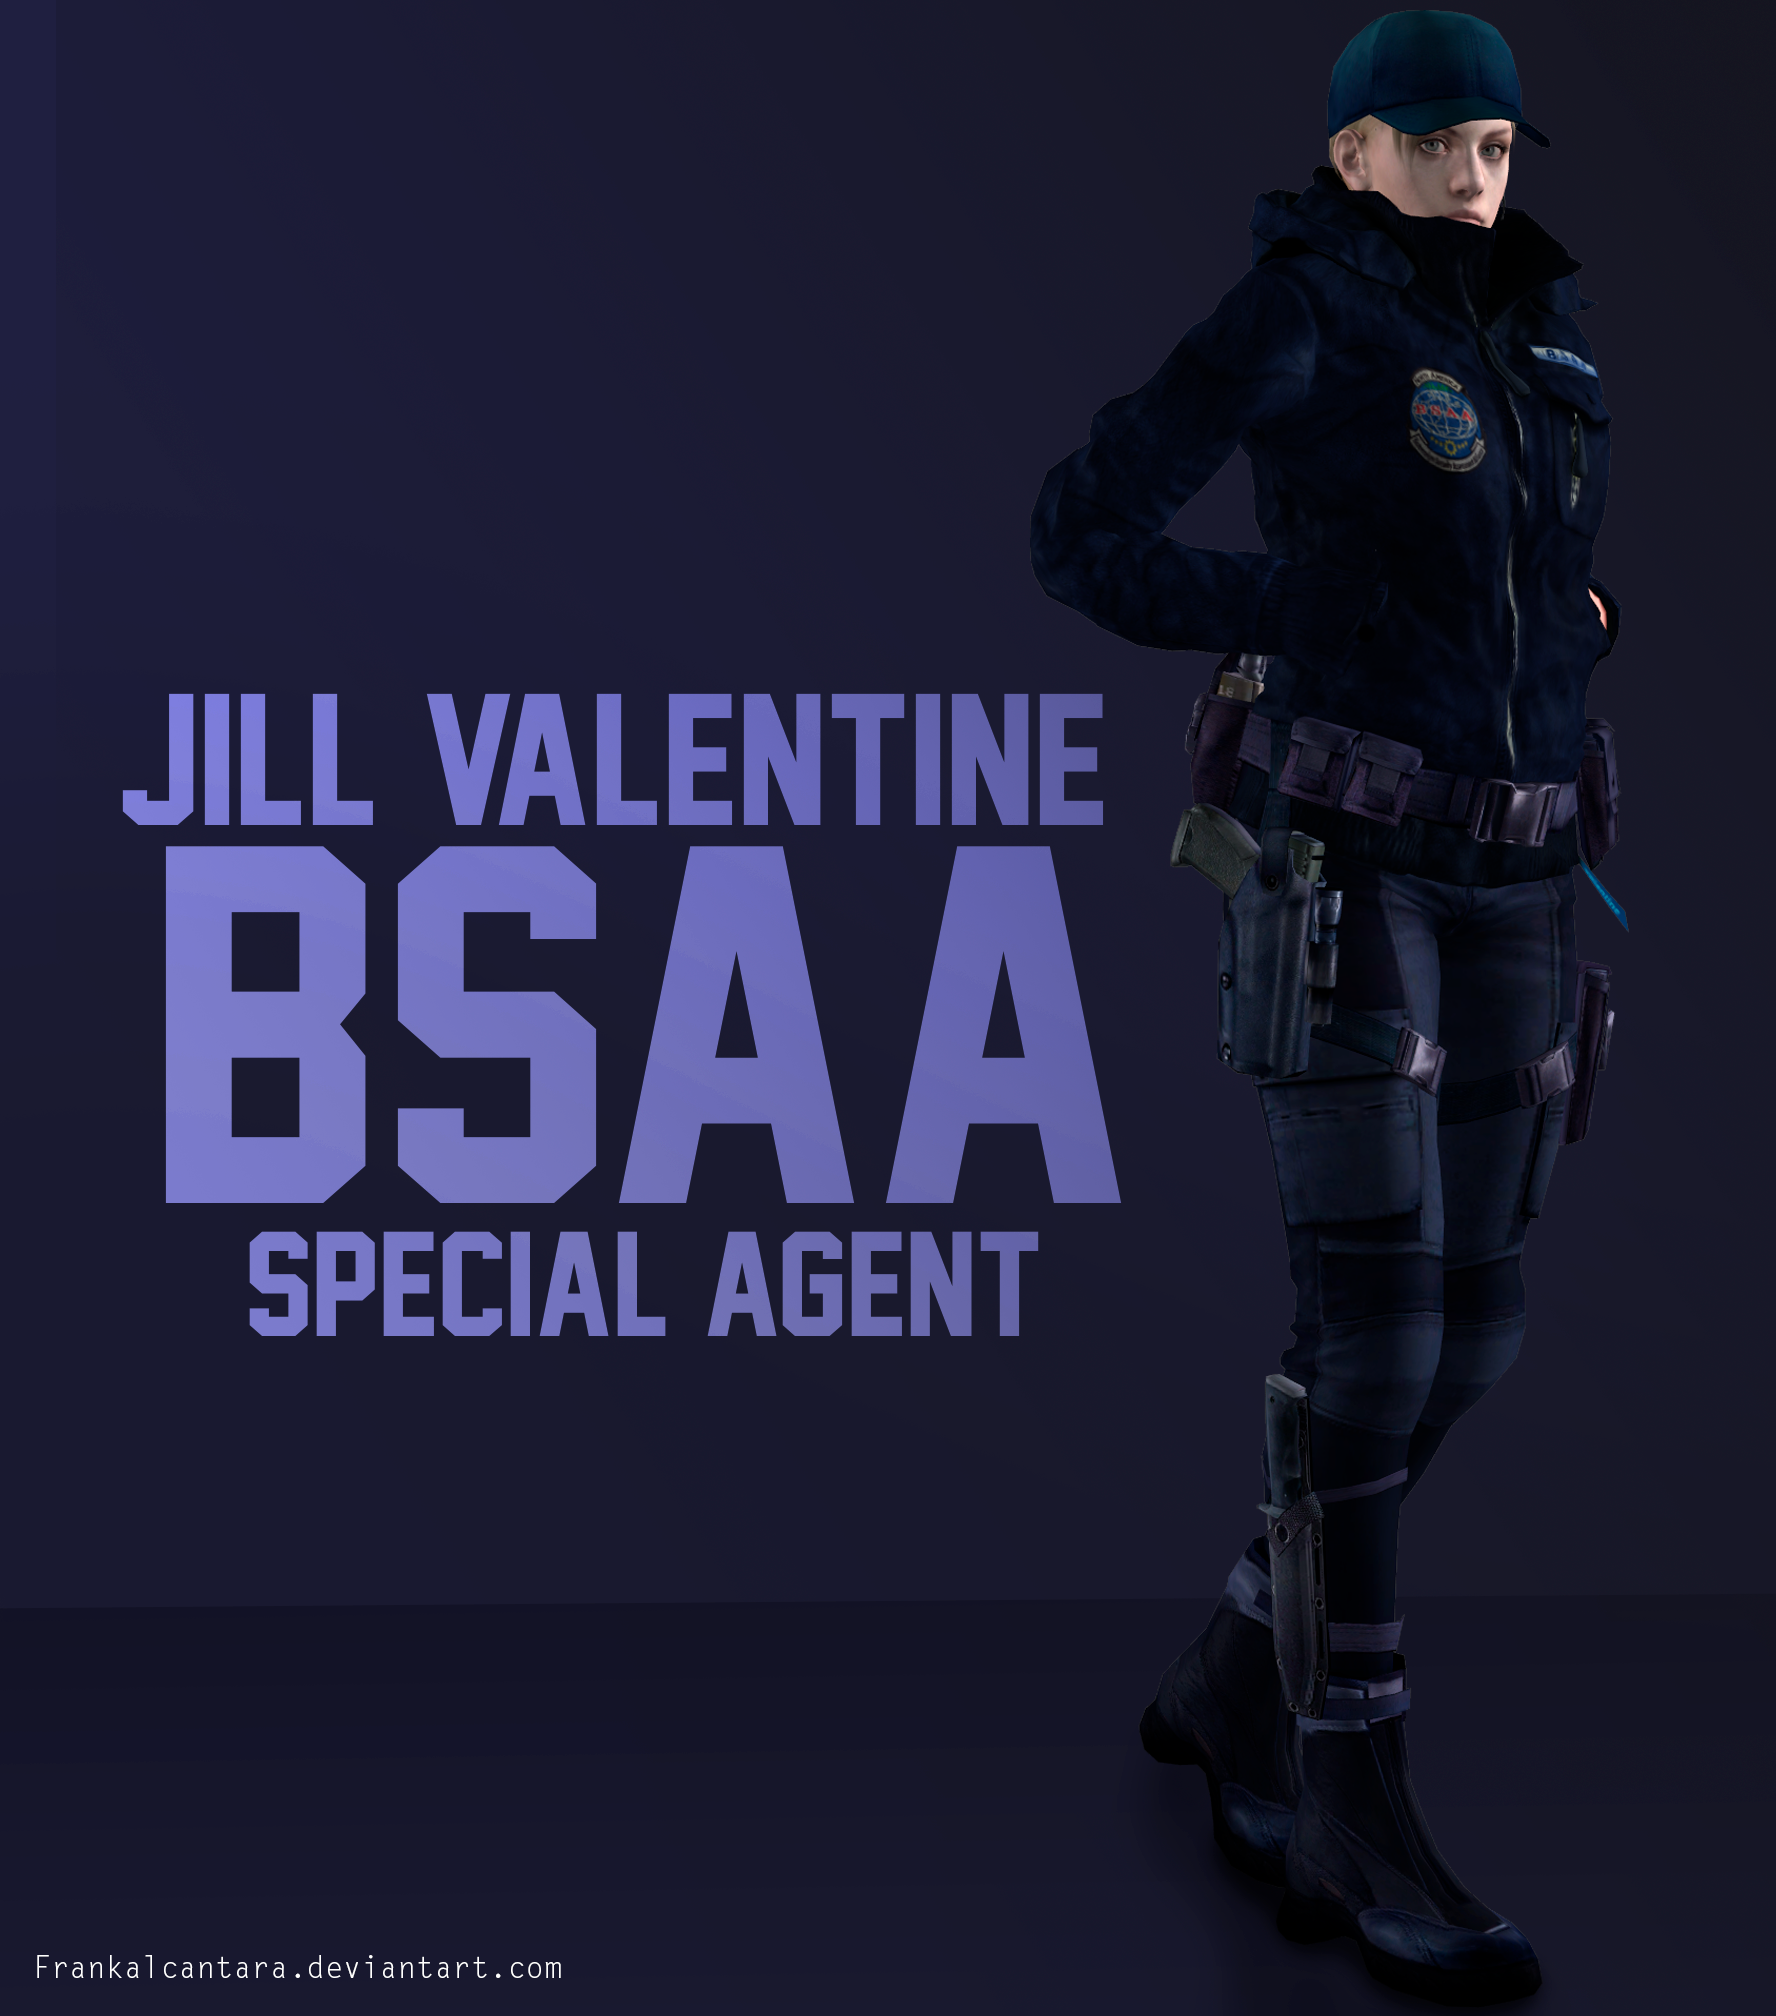 XPS Model - Jill Valentine BSAA Special Agent.